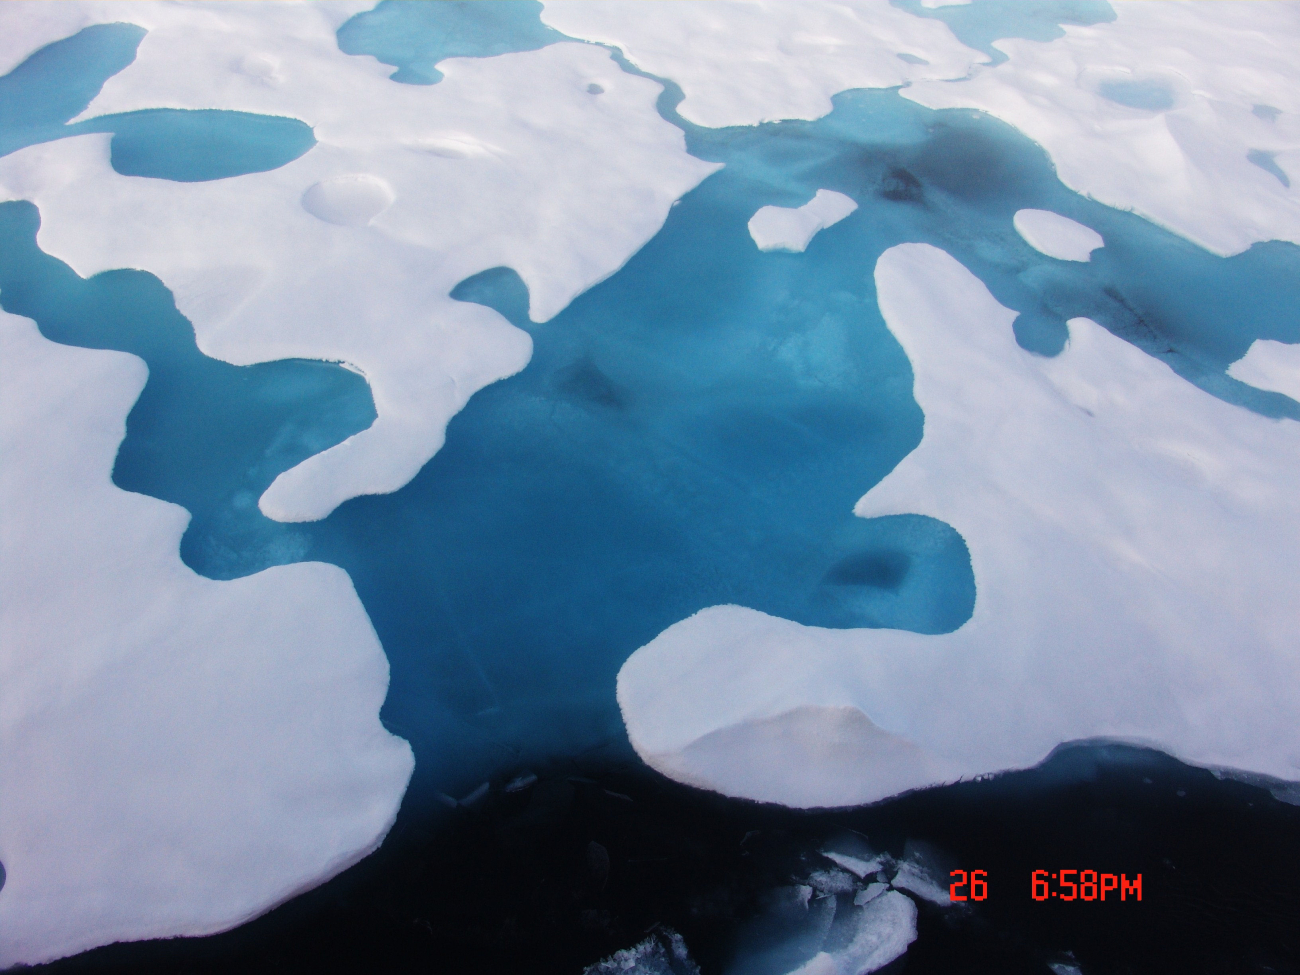 Melt pools breaking through with the dark area at bottom being Arctic seawater